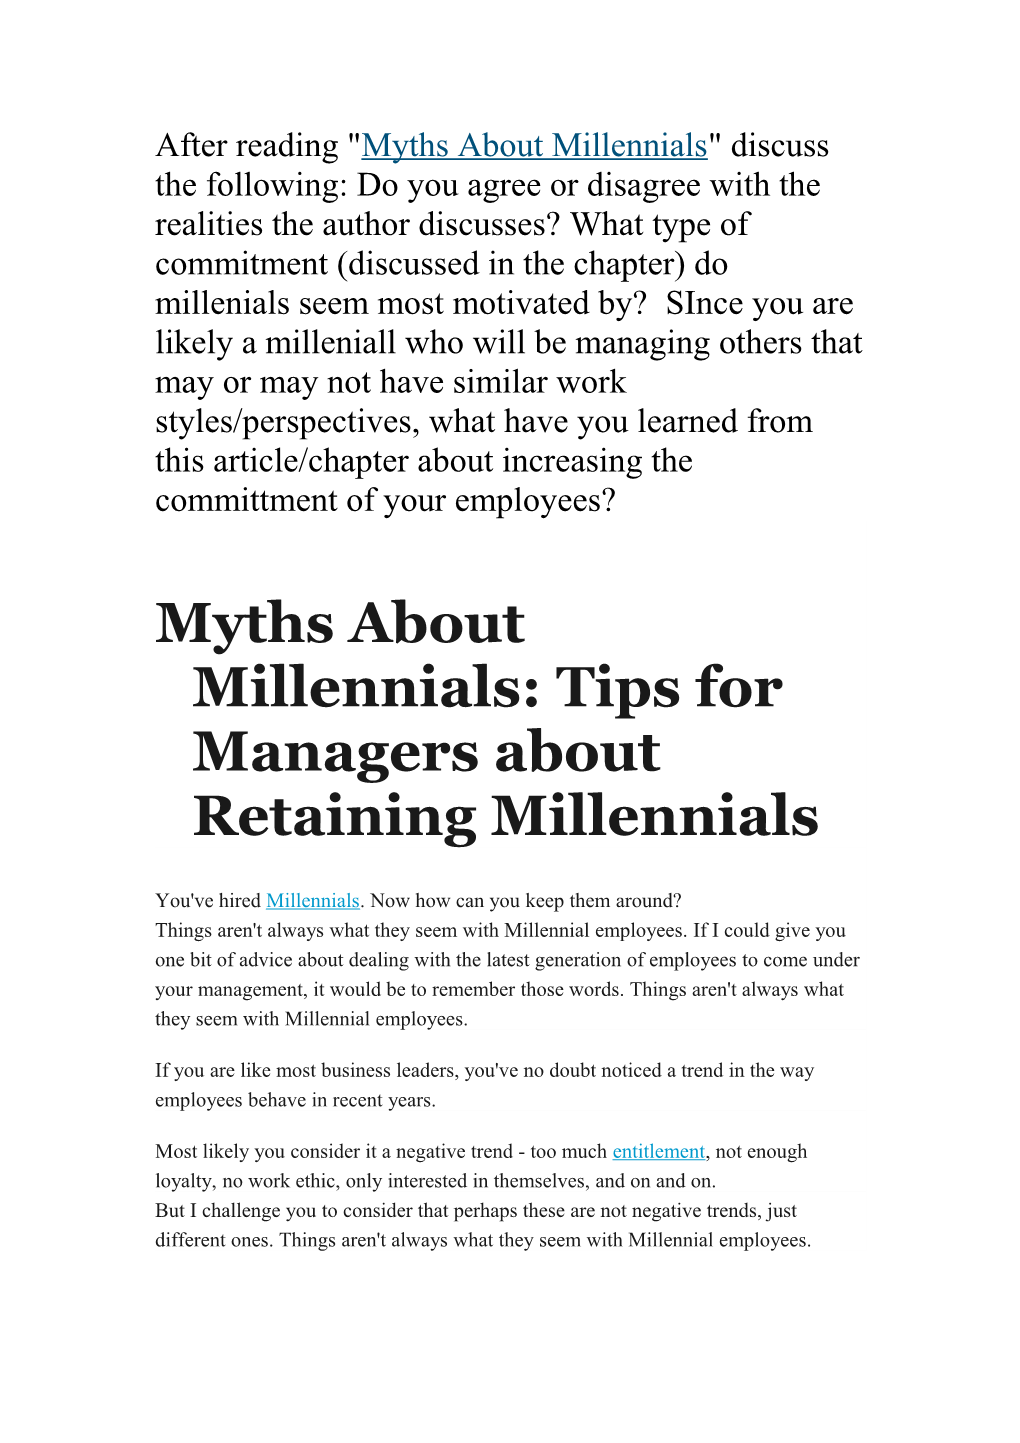 Myths About Millennials: Tips for Managers About Retaining Millennials